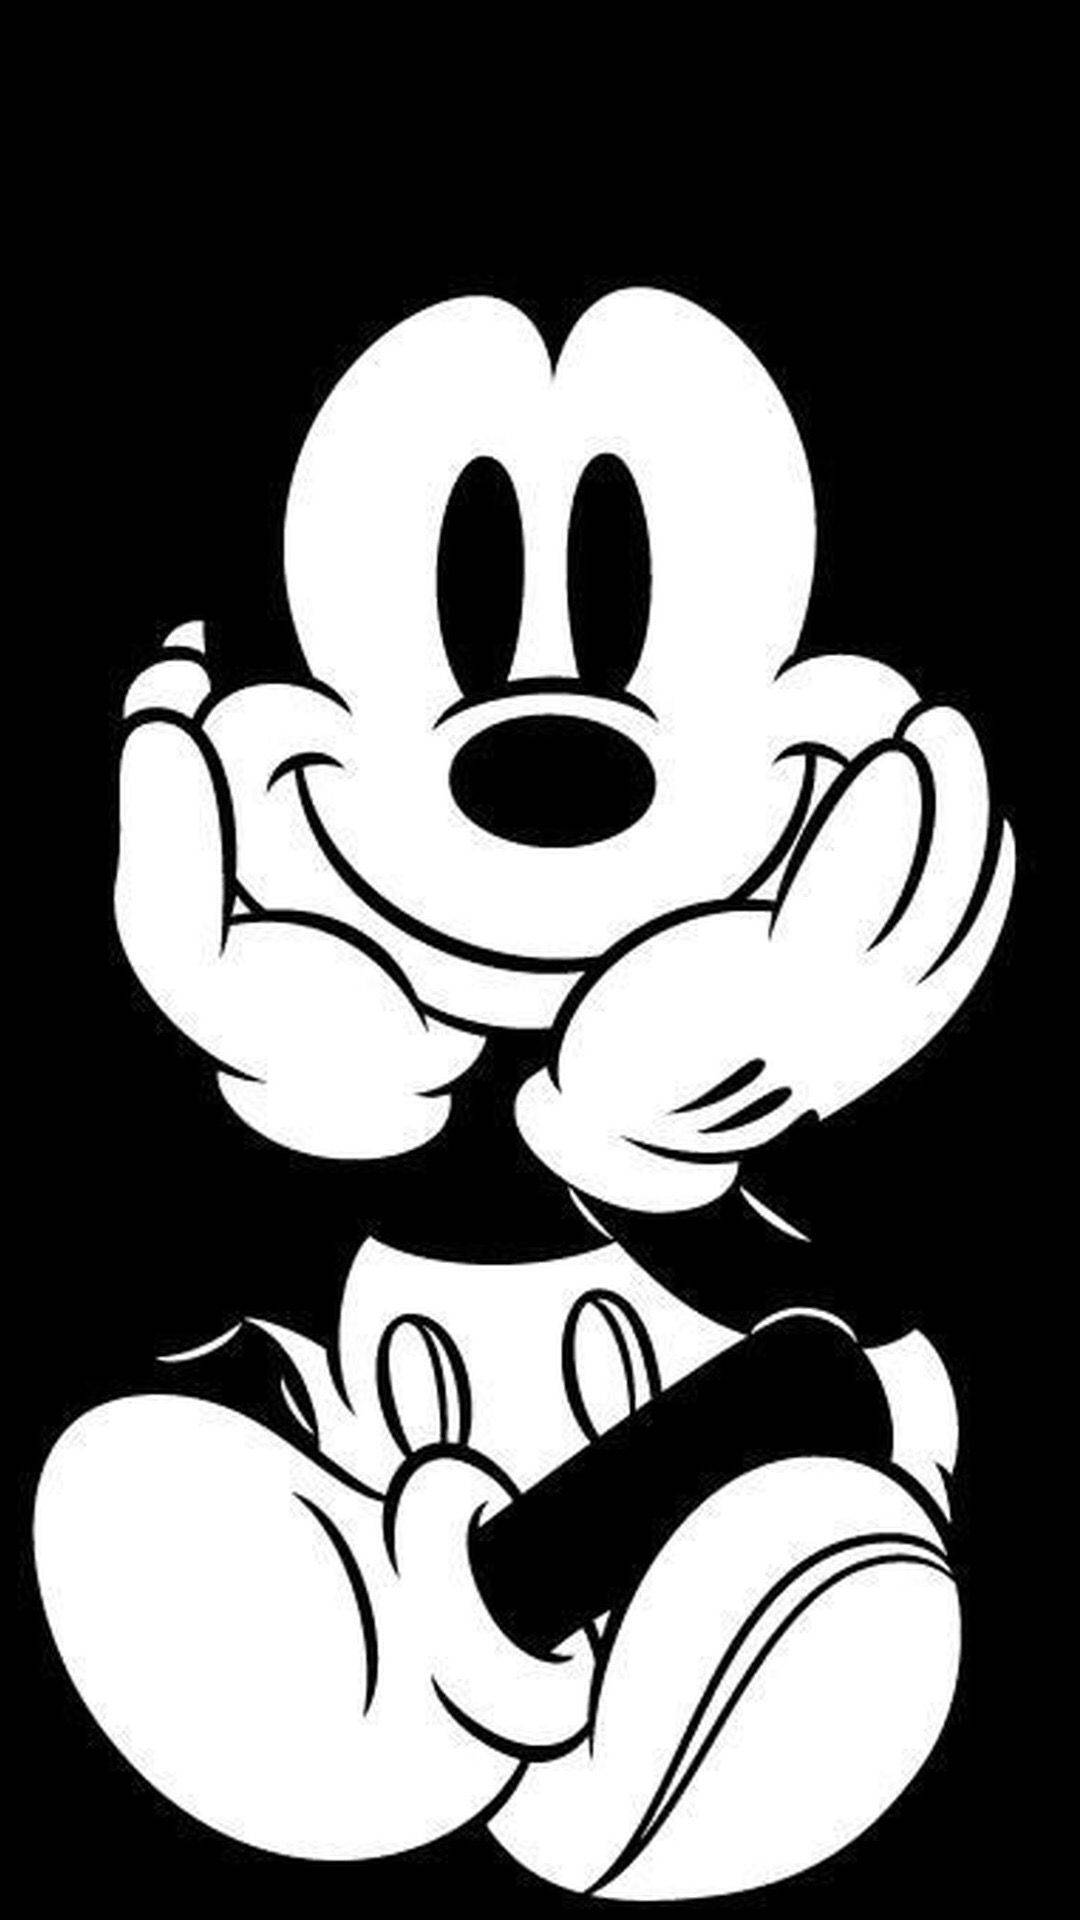 Cute Black And White Mickey Mouse Wallpaper